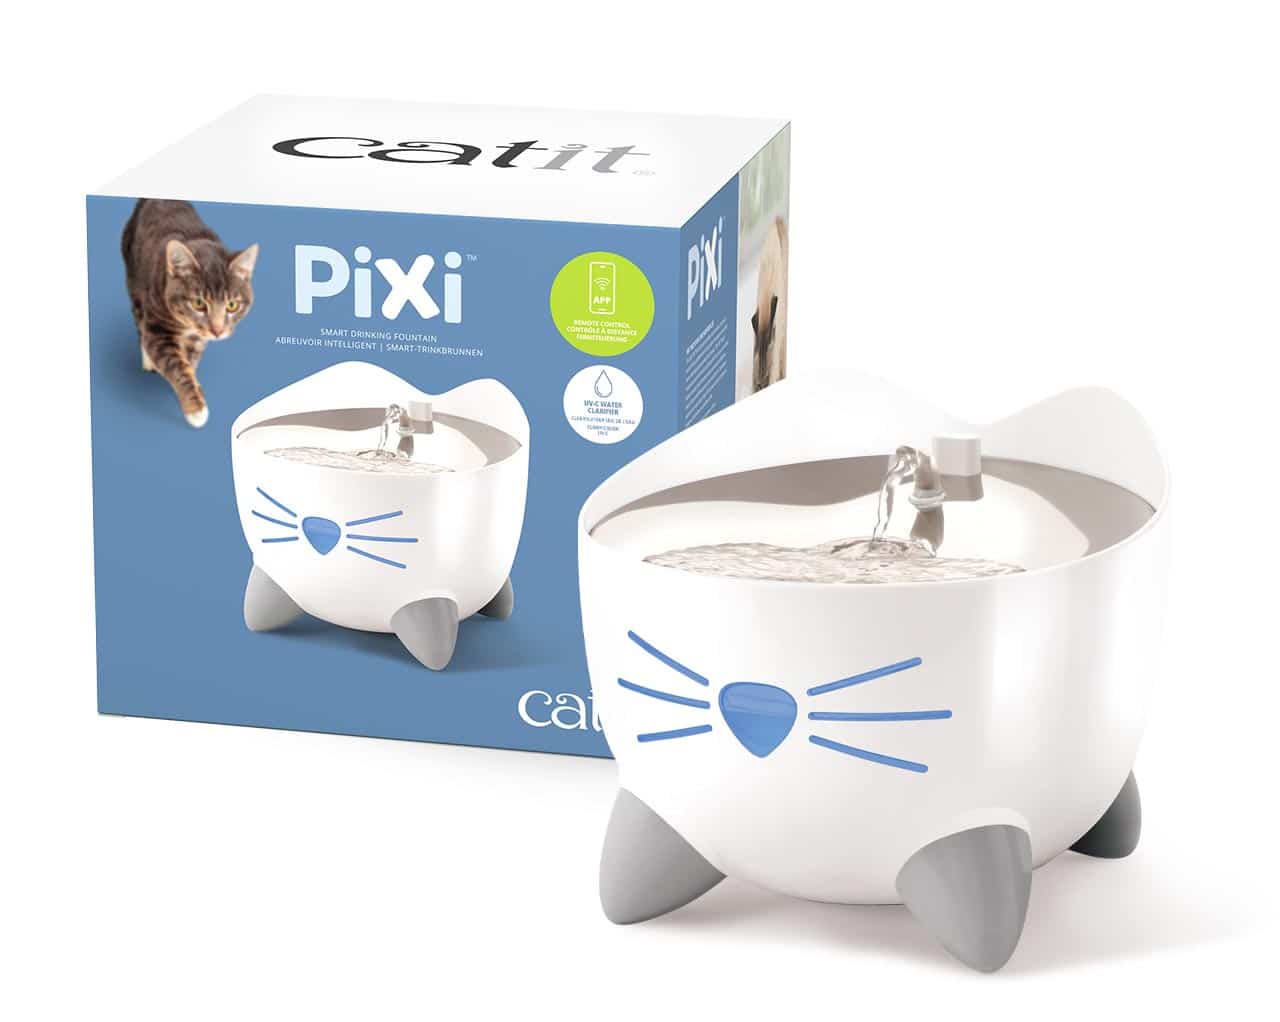 PIXI smart drinking fountain with catitude